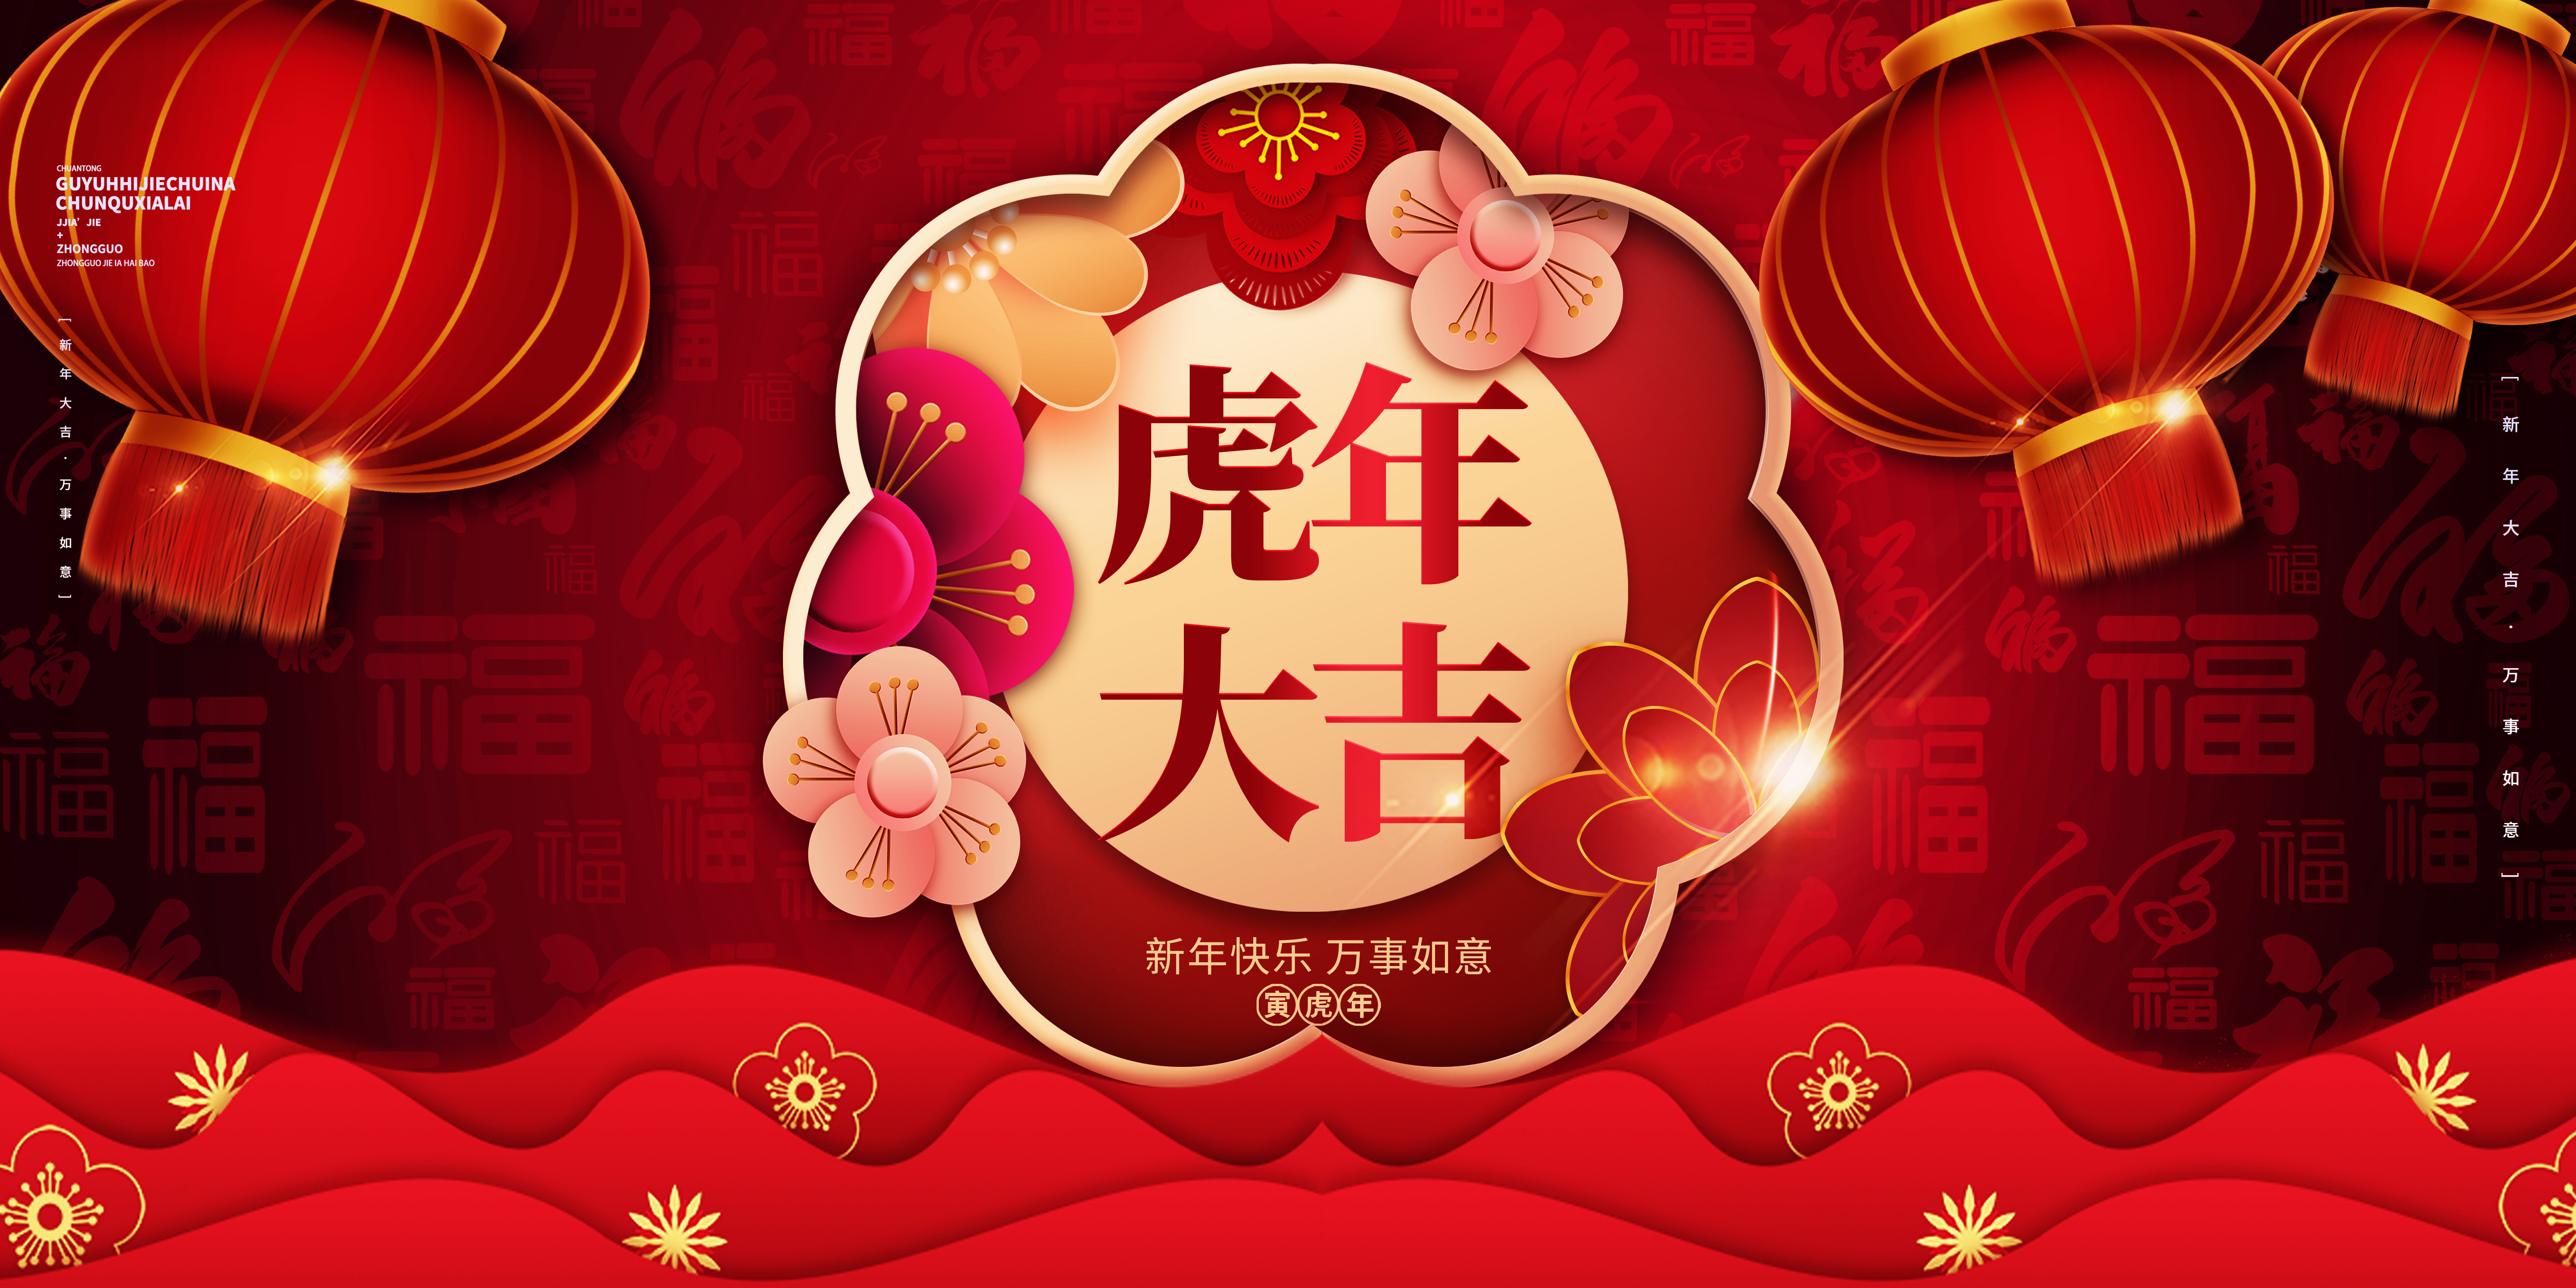 Luoyang Copper Processing Group Golden Statue Art Products Co., Ltd. wishes everyone a happy New Year~